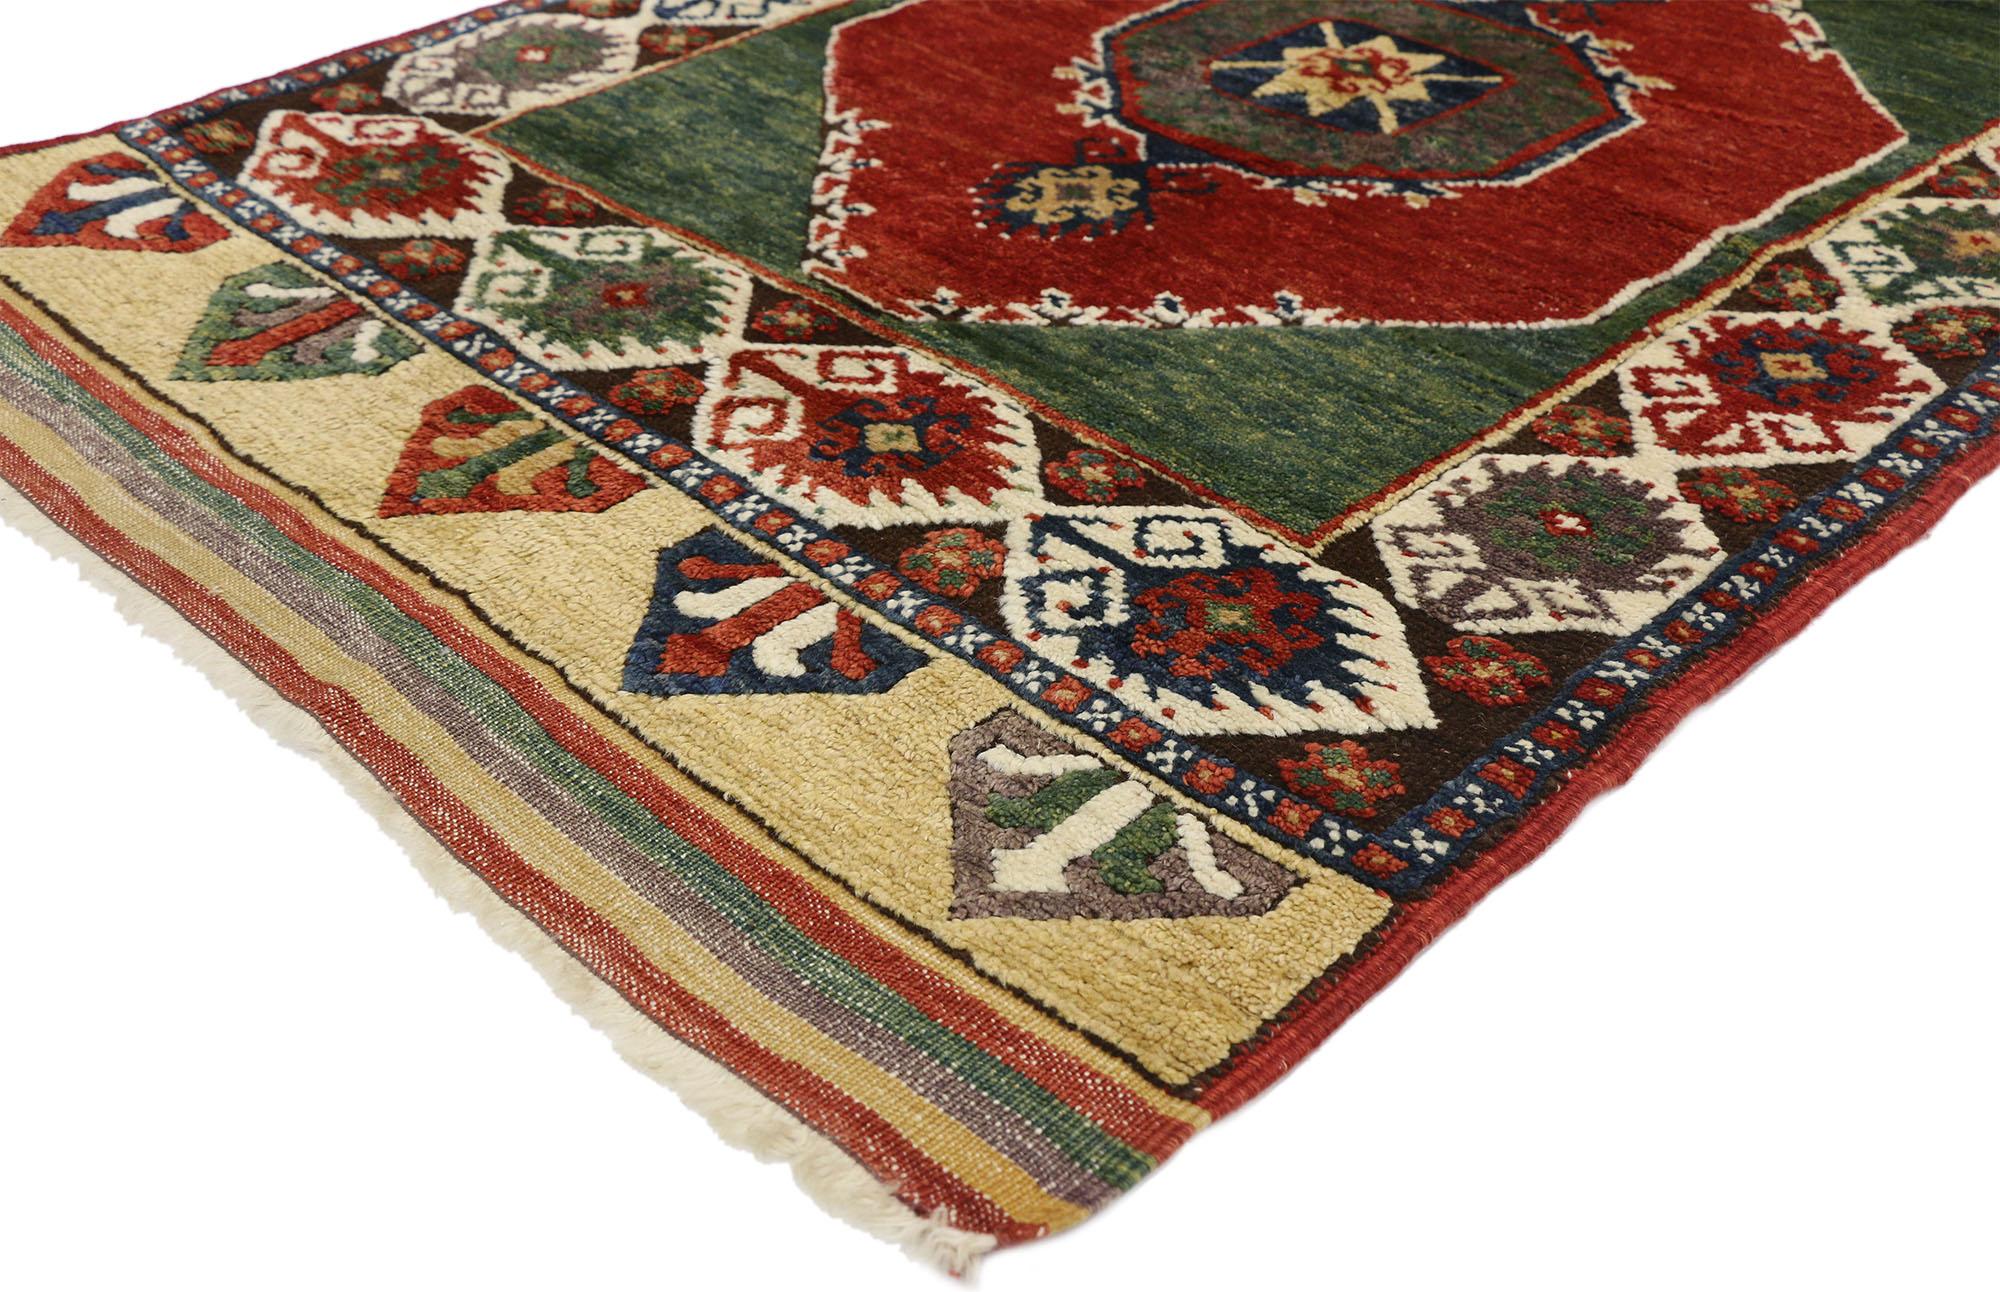 52444, vintage Turkish Oushak rug with American Craftsman tribal style. Imbued with Anatolian symbolism, this hand-knotted wool vintage Turkish Oushak rug with American Craftsman style charms with classic, tribal appeal, and would be at home among